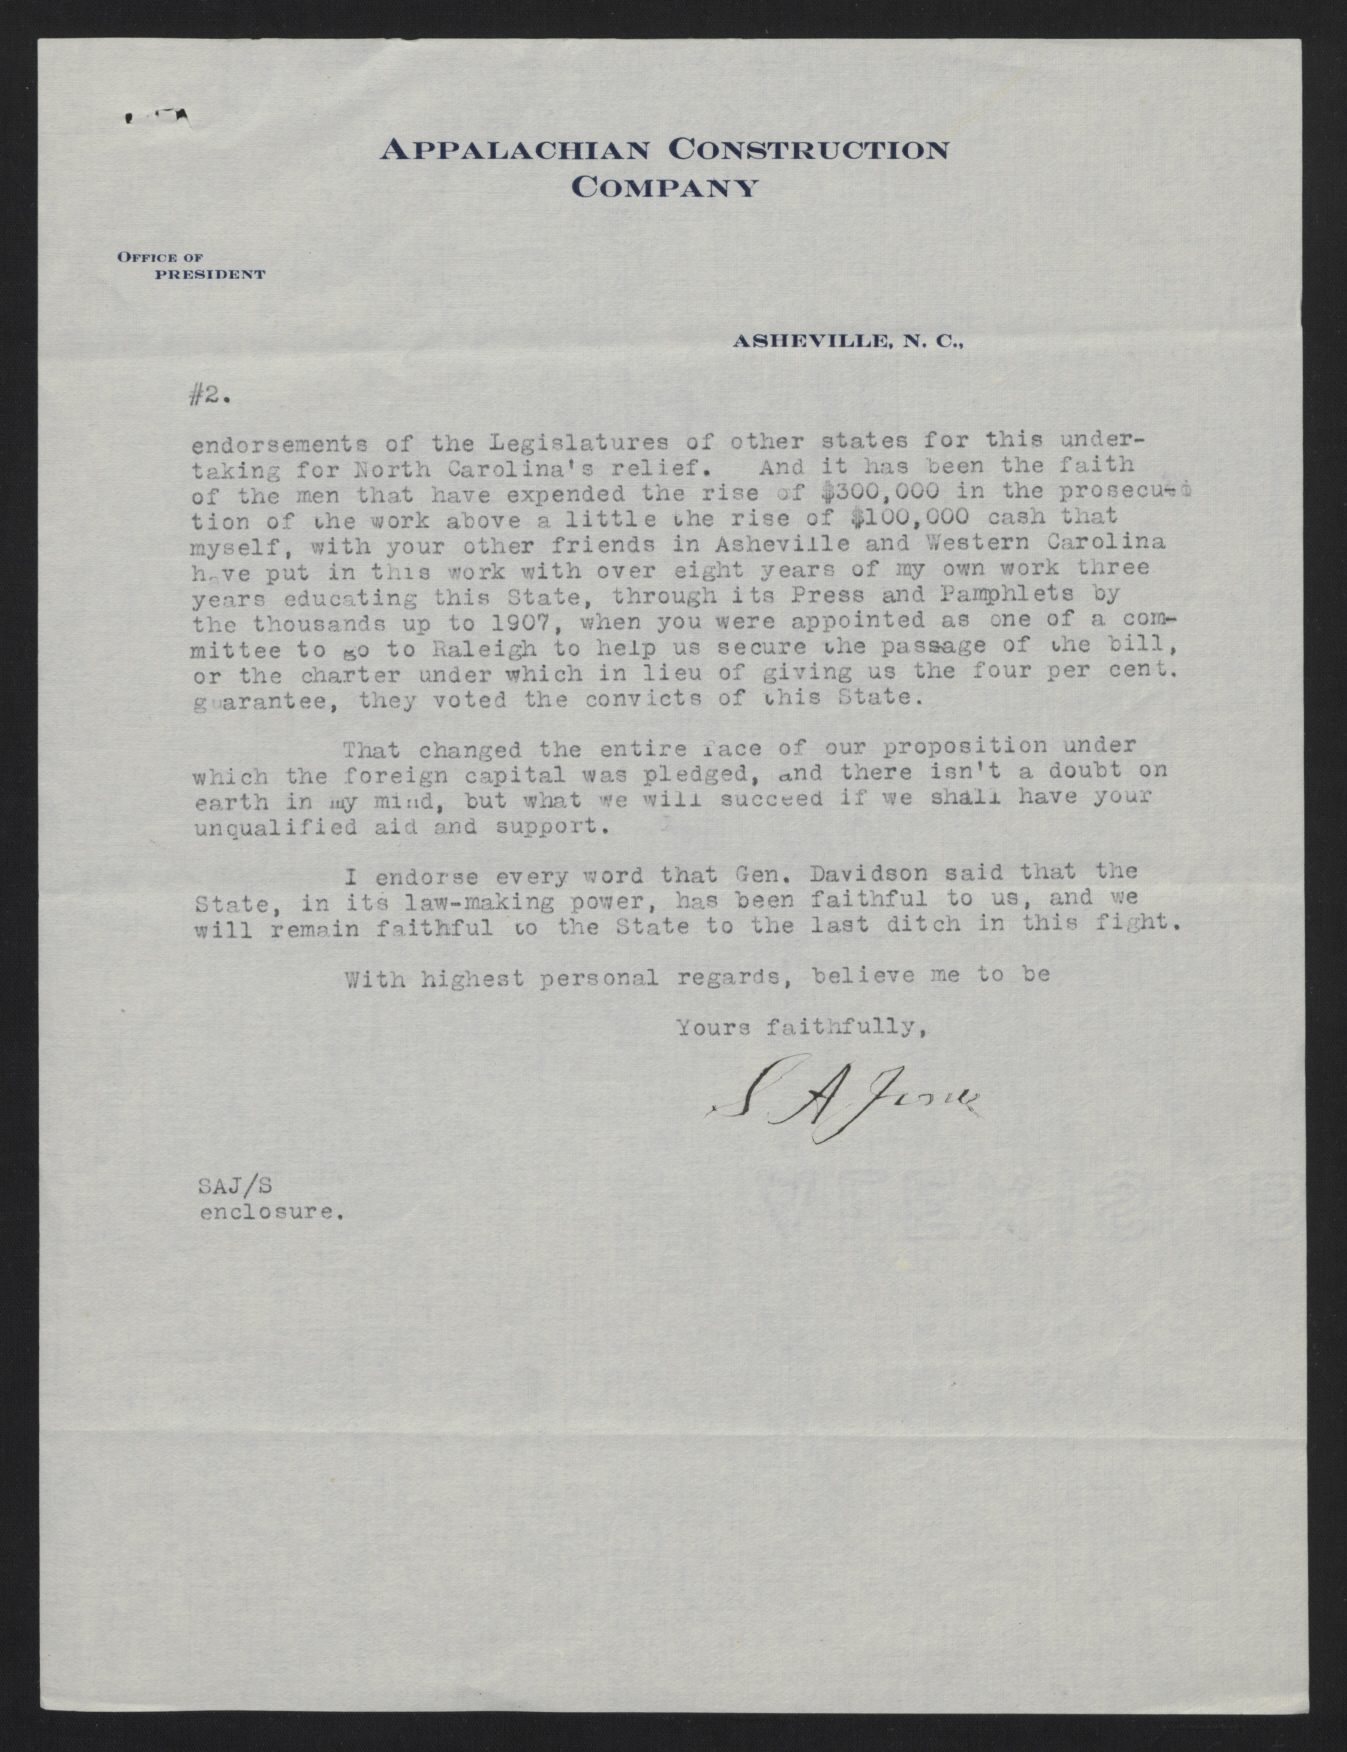 Letter from Jones to Craig, July 11, 1913, page 2